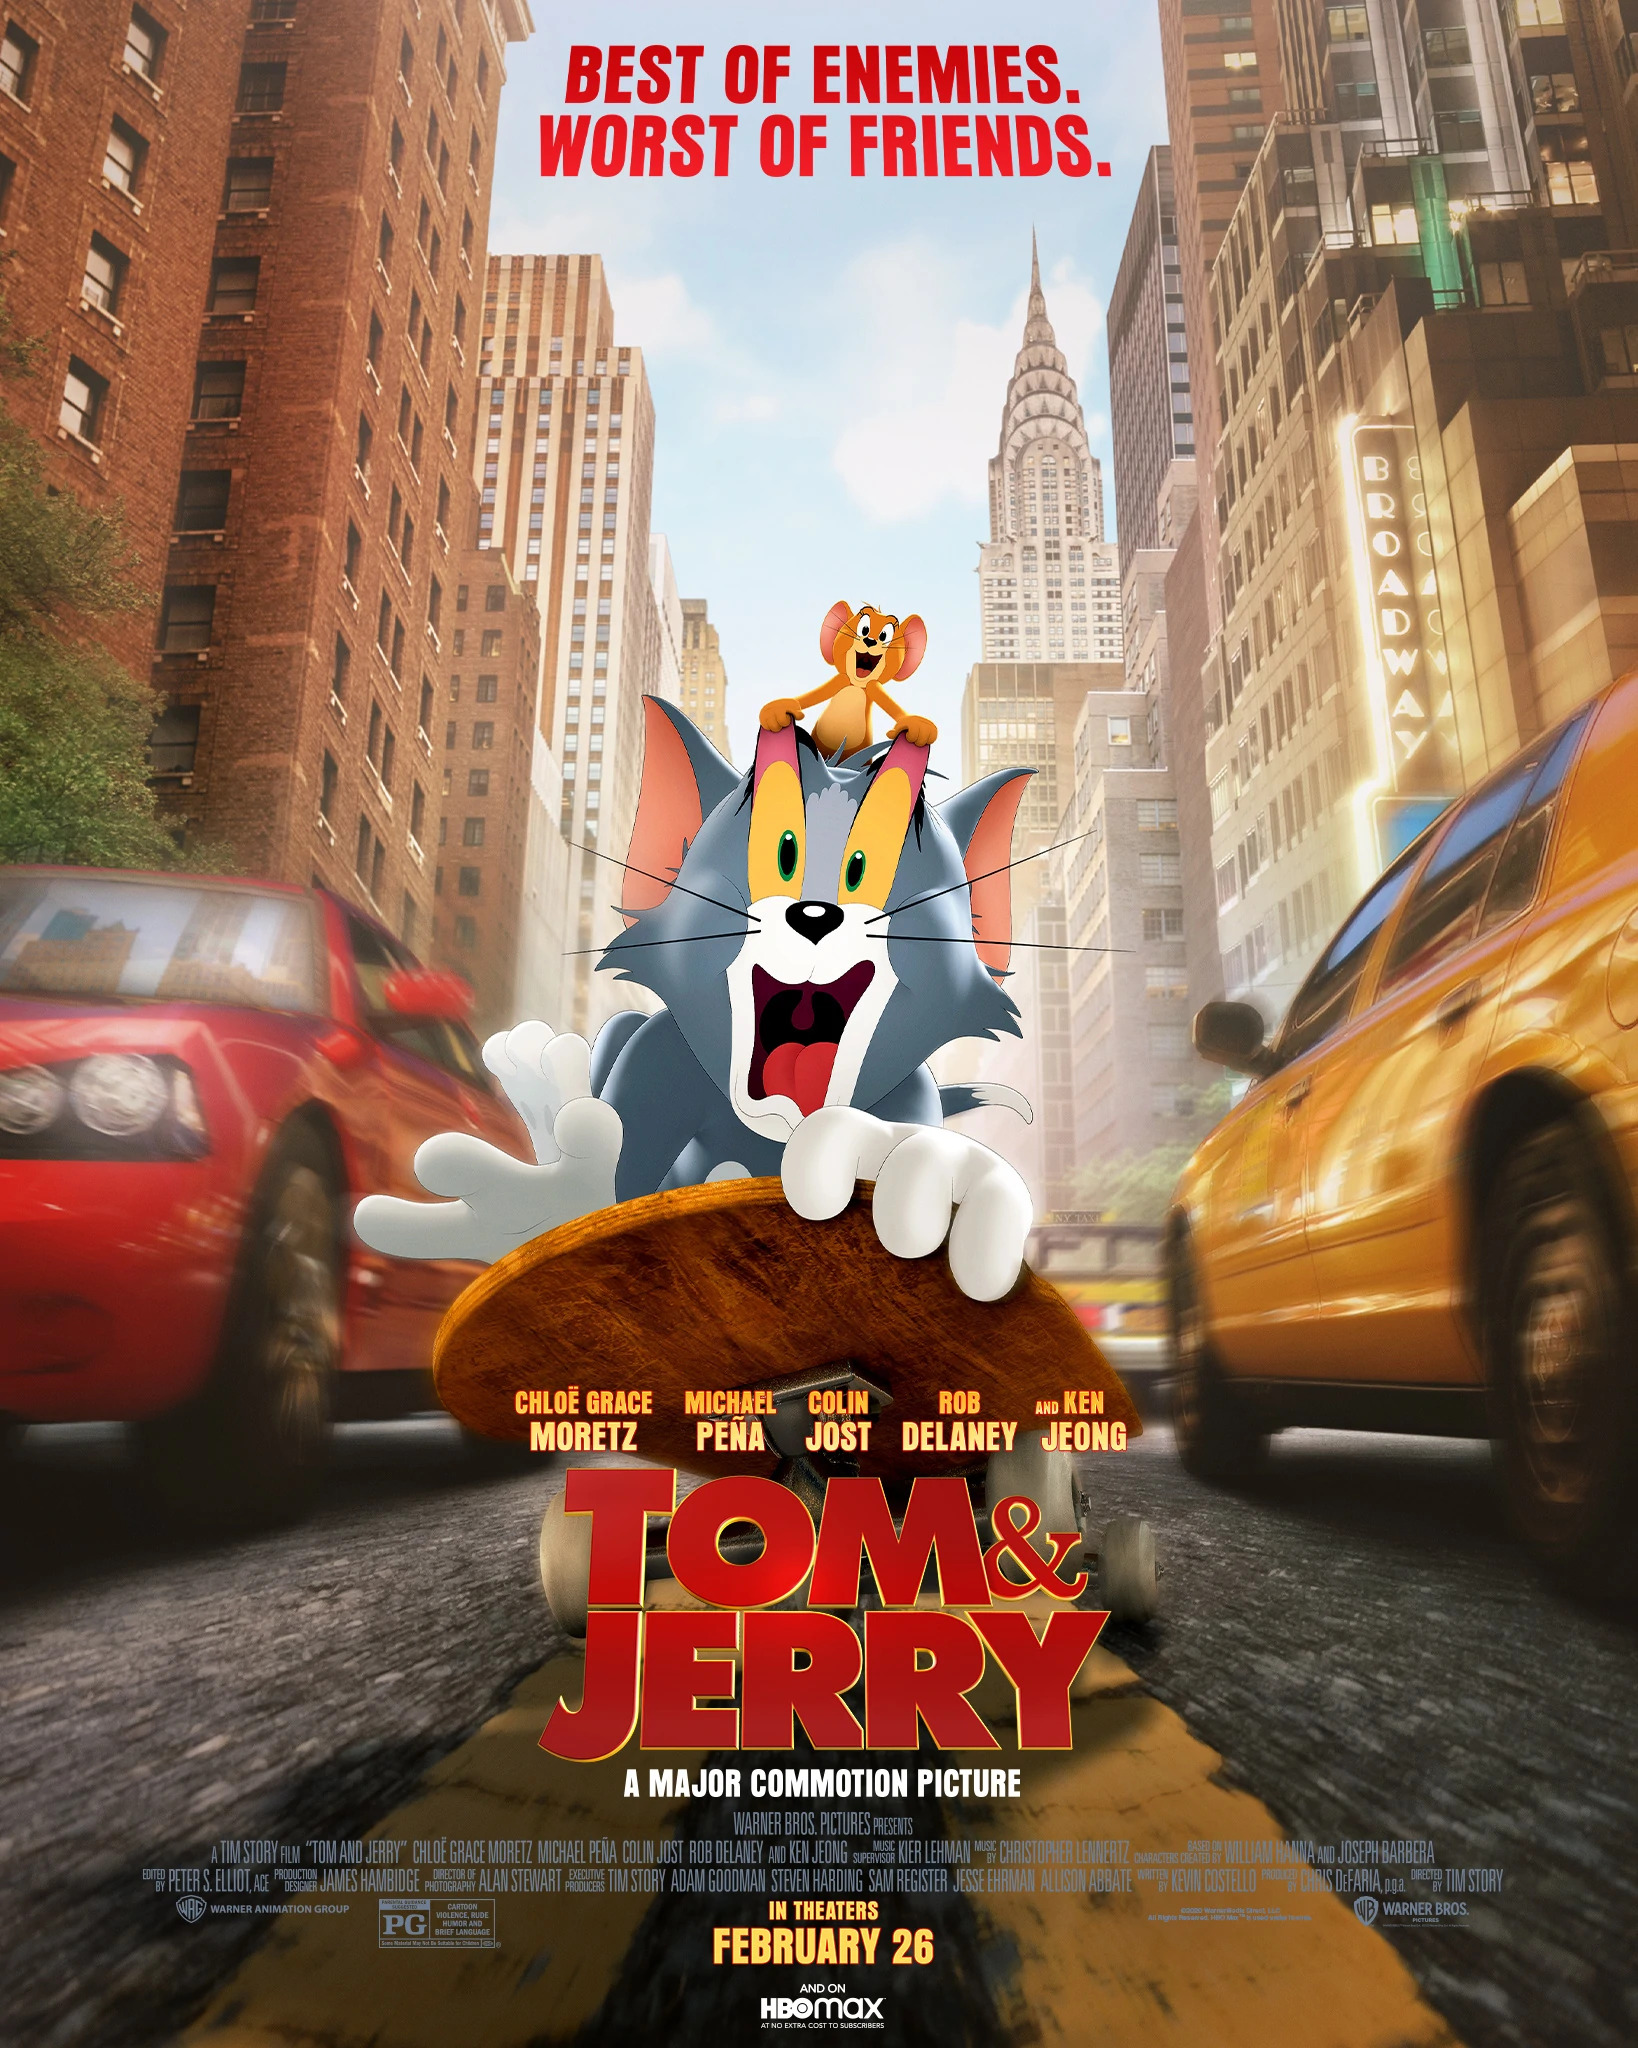 Tom and Jerry (2021 film) Warner Bros pic pic